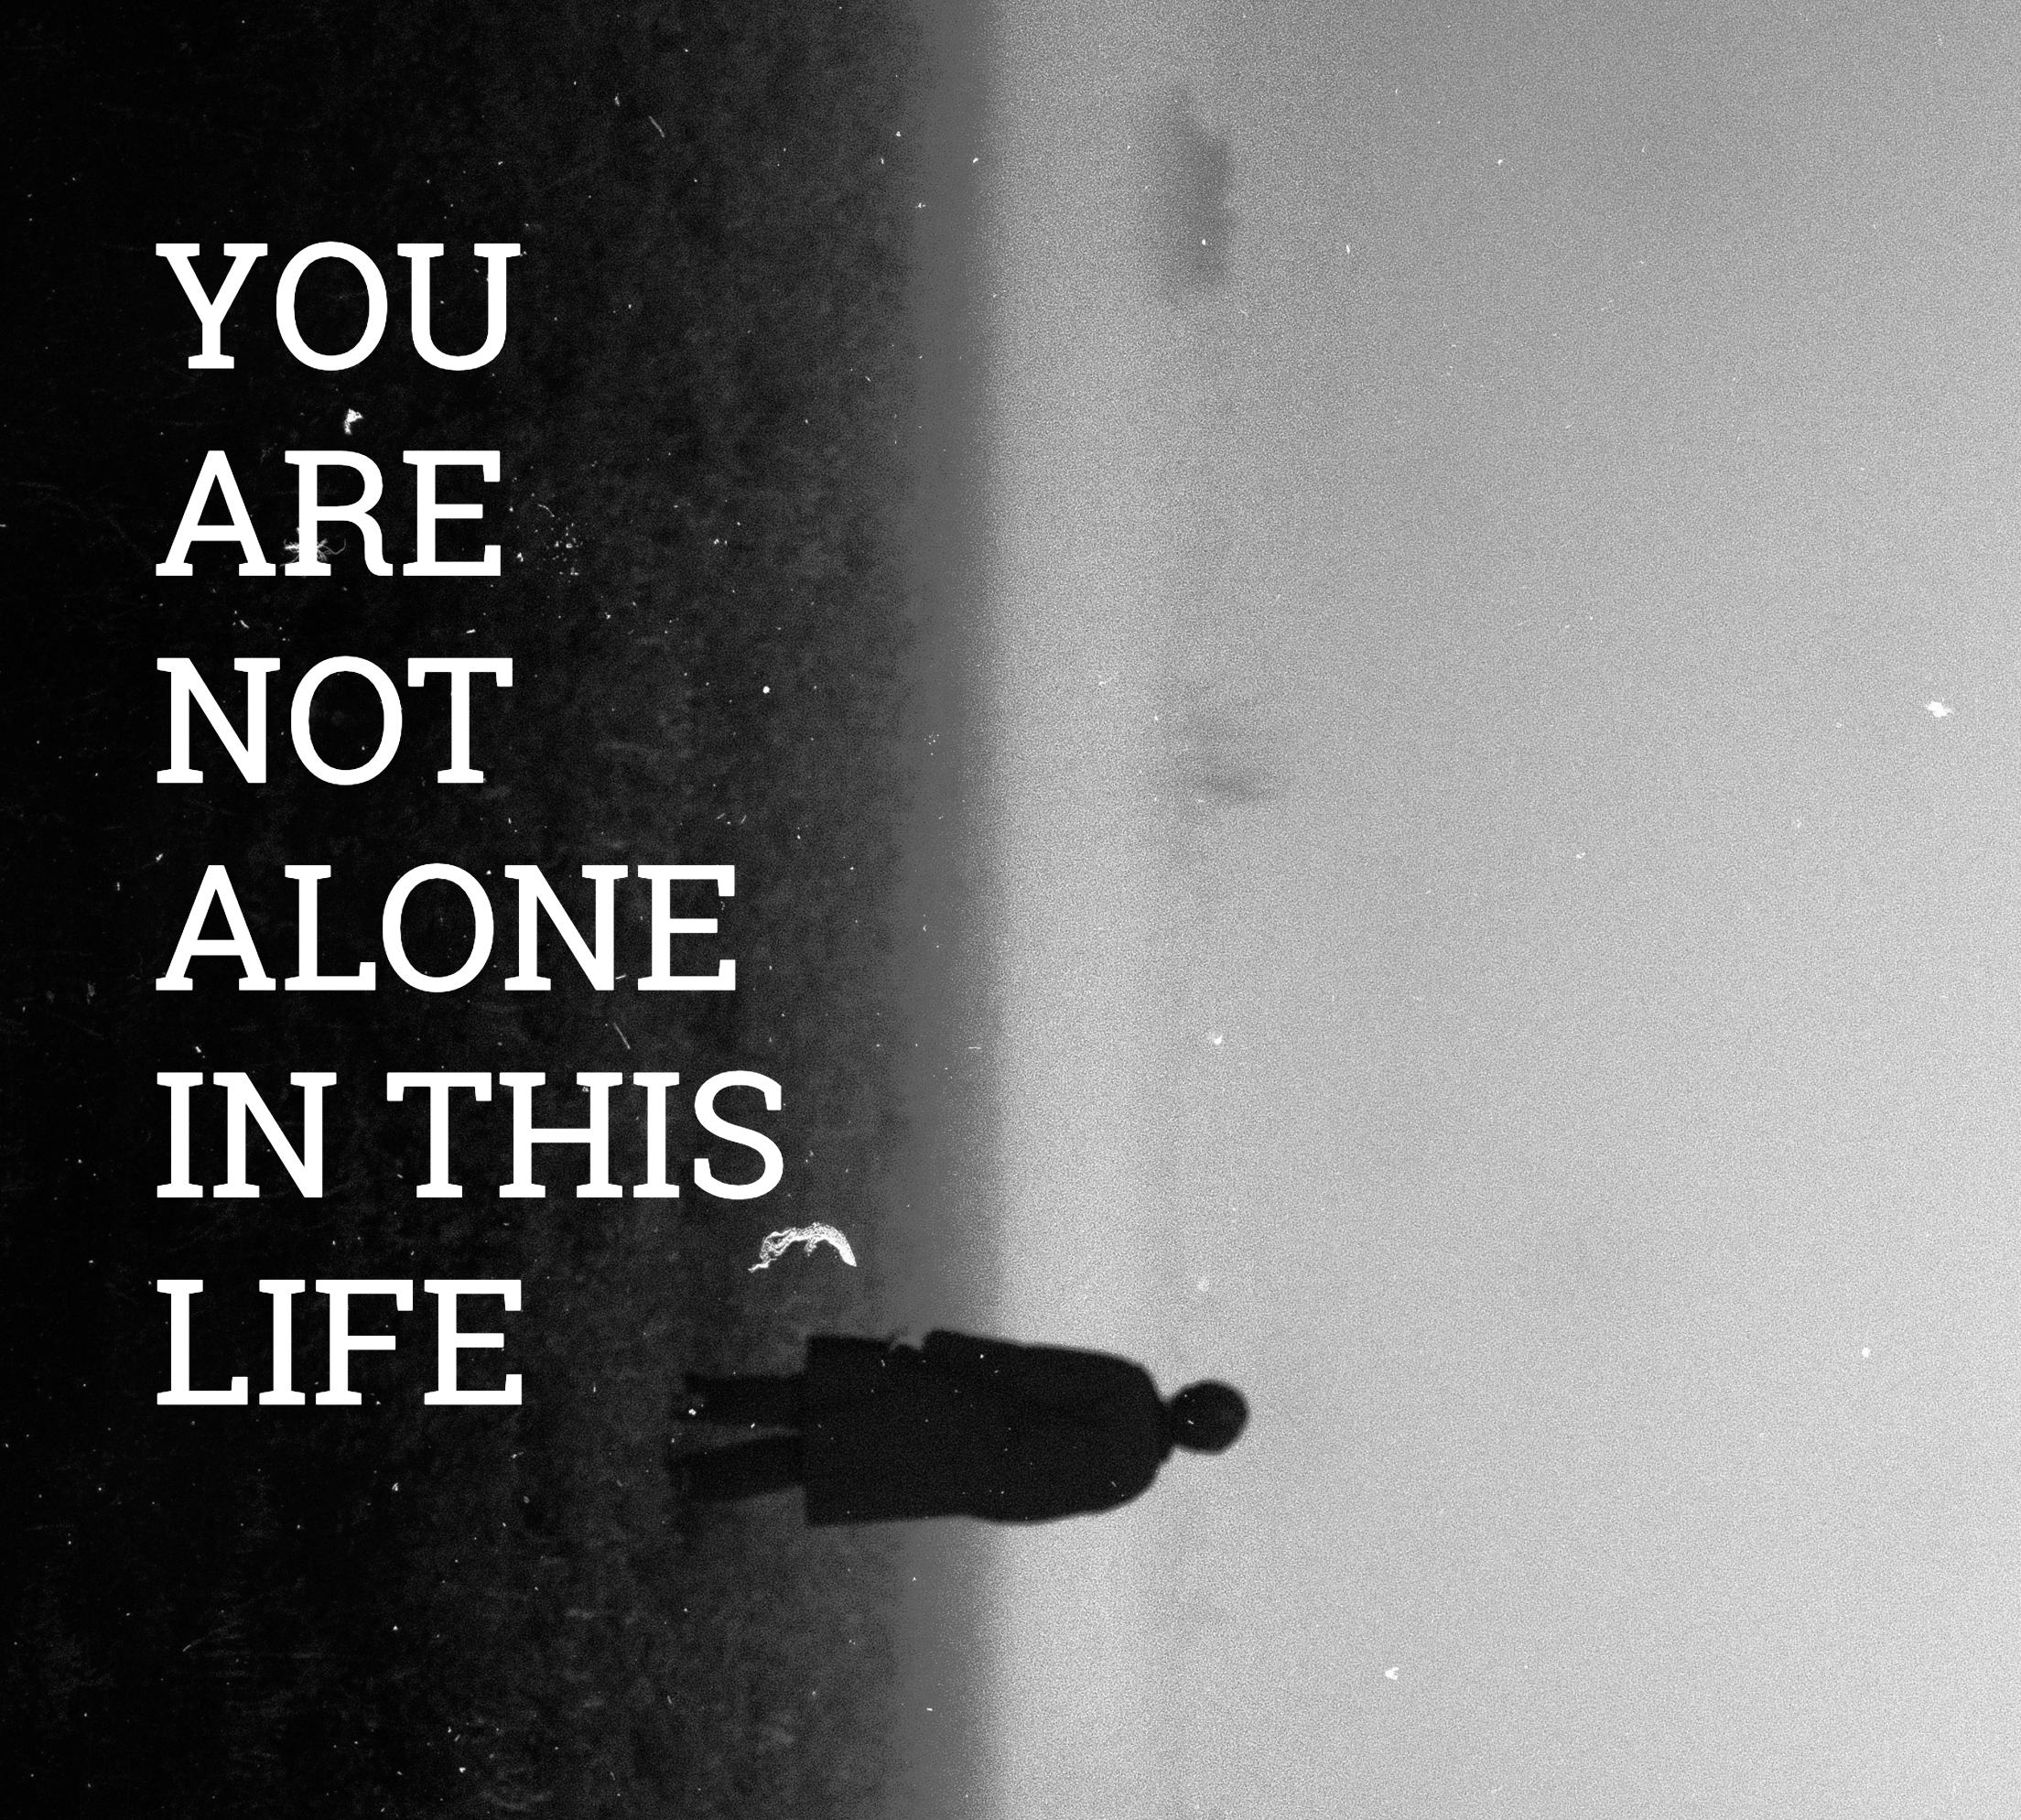 You are Not Alone in this Life by Rufus Roswell